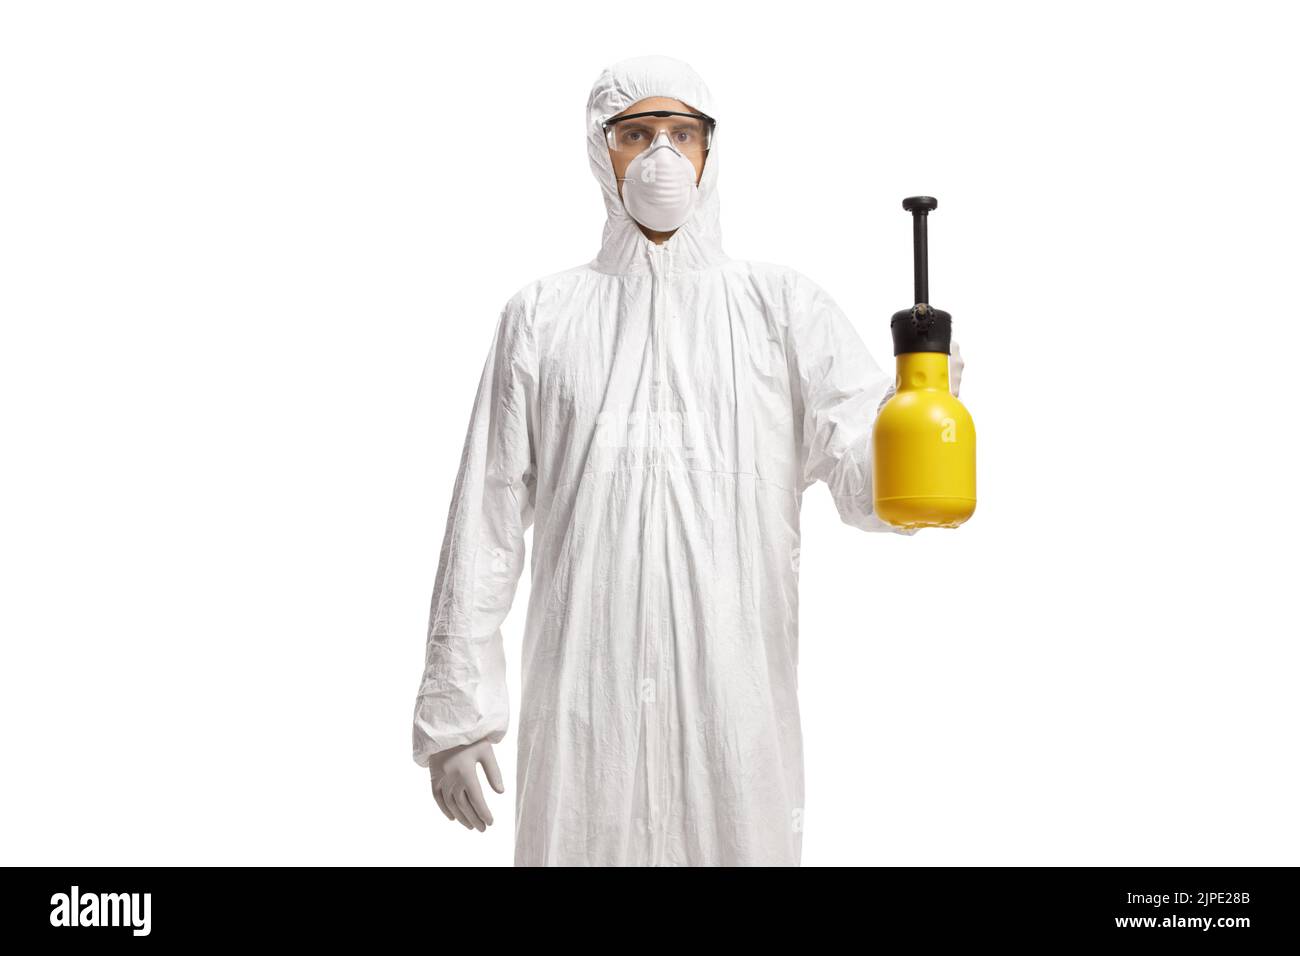 Responder in a white protective suit holding a disinfectant spray isolated on white background Stock Photo